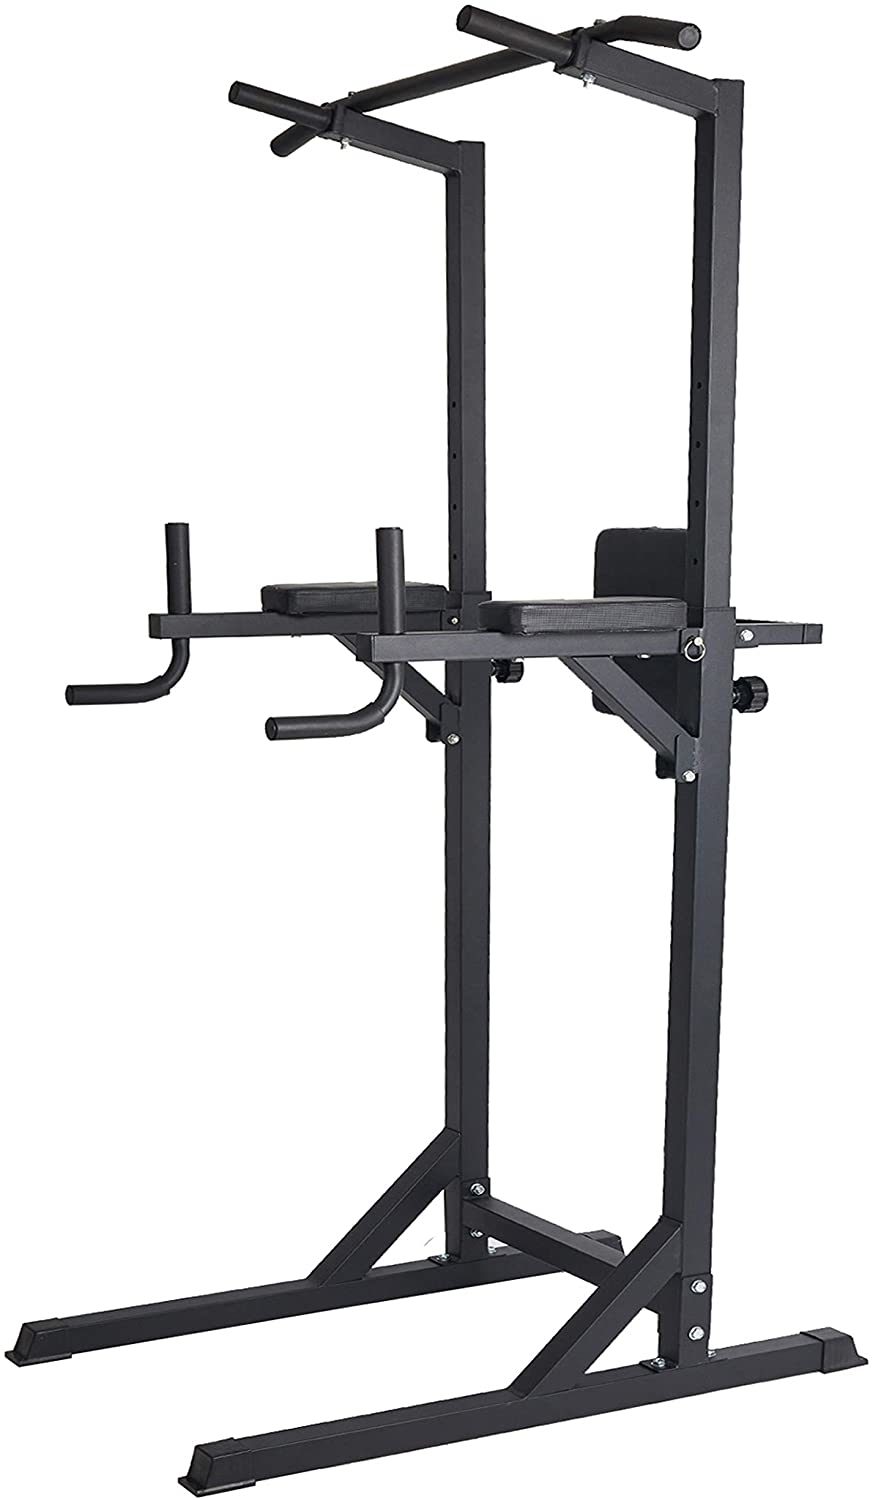 Power Tower Adjustable Multi-Function Workout Station